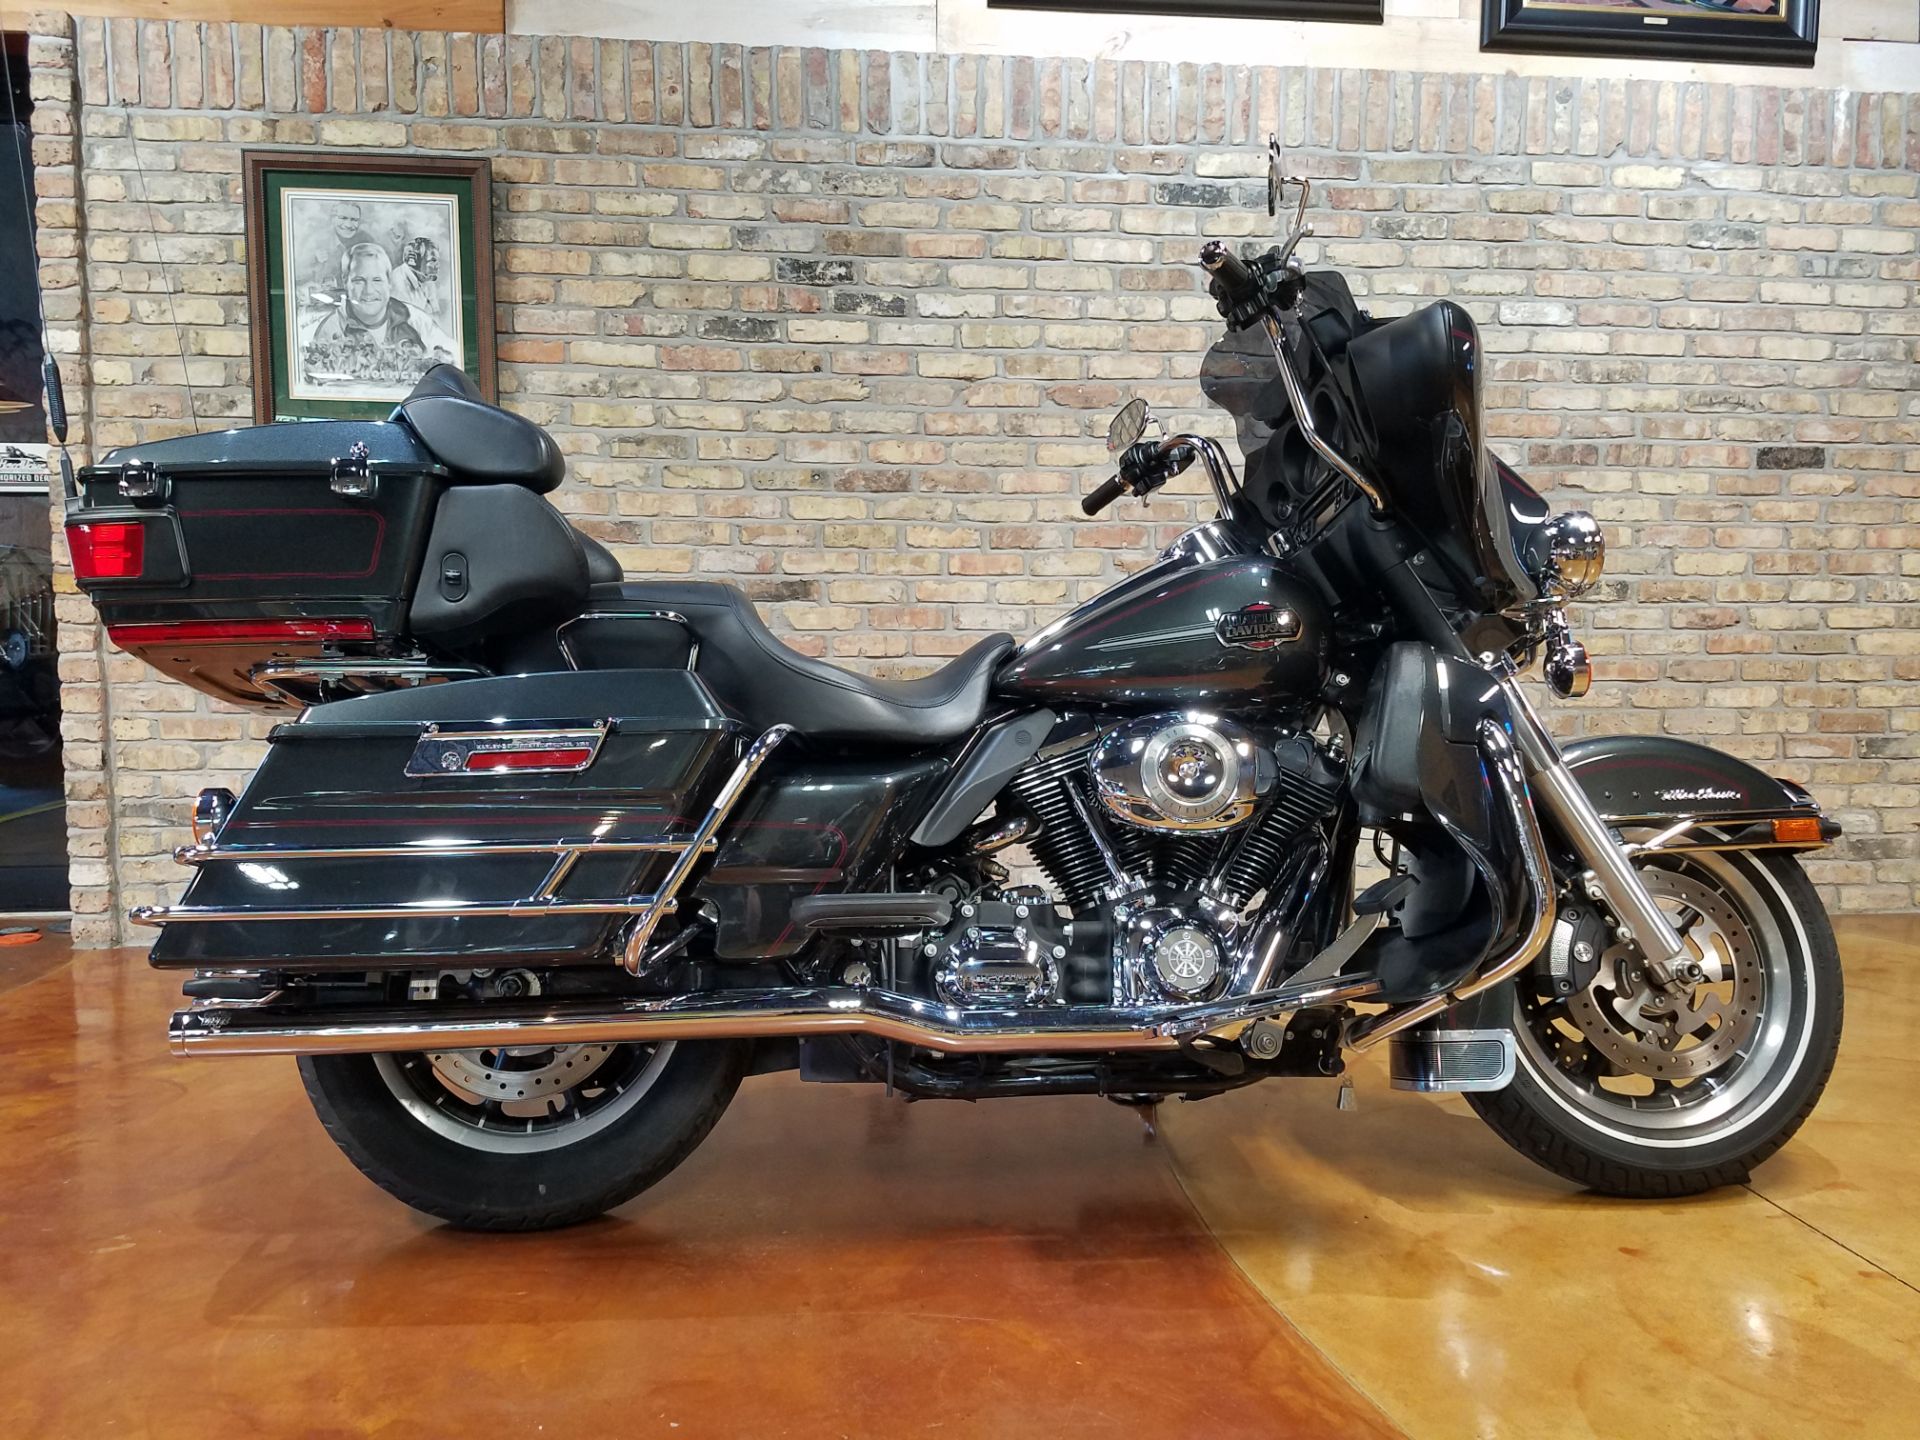 Used 2008 Harley Davidson Ultra Classic Electra Glide Motorcycles In Big Bend Wi 4421 Black Pearl